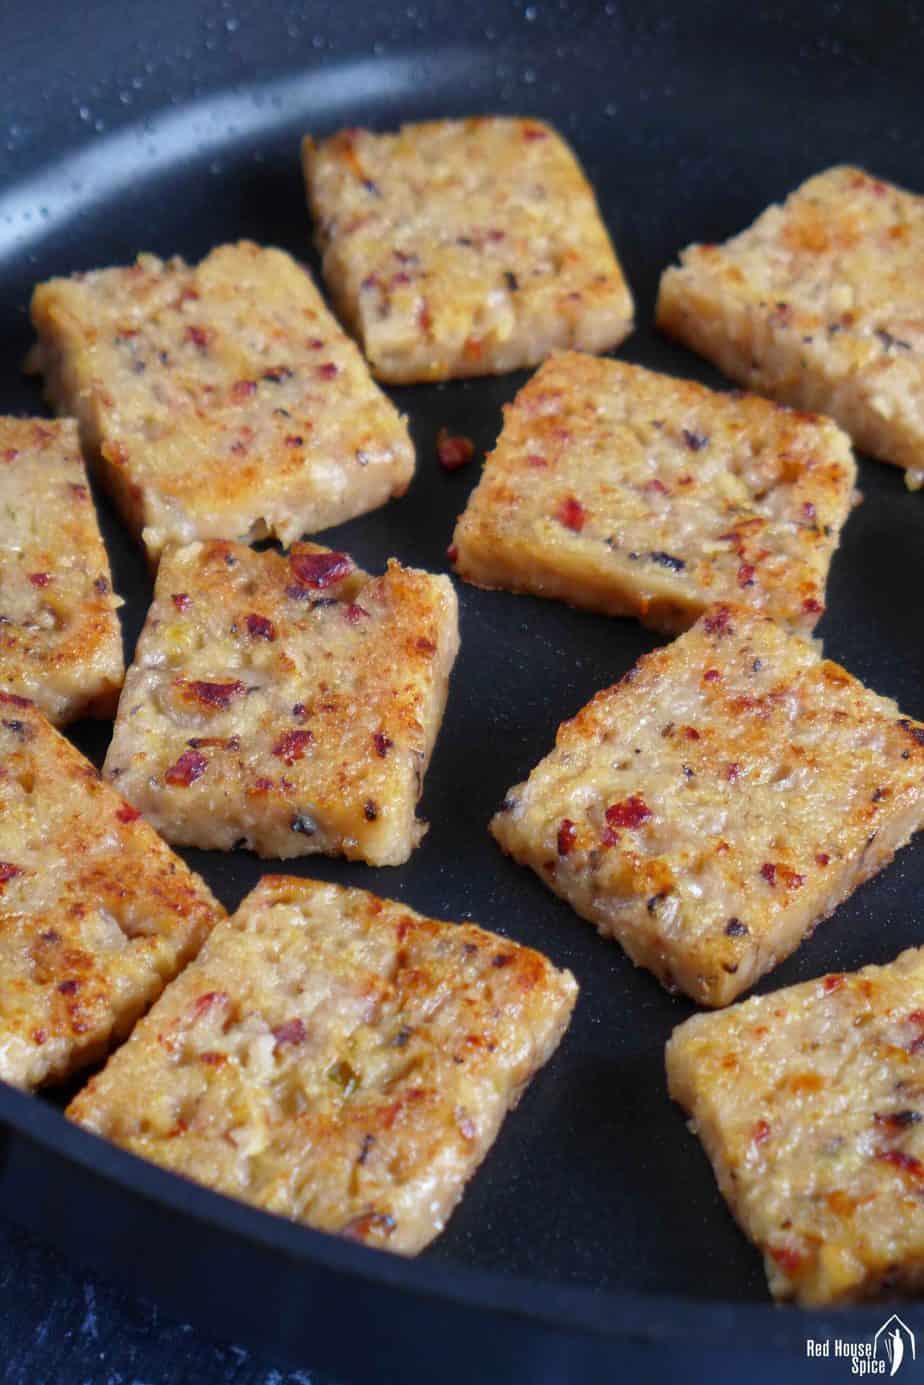 Frying turnip cake slices in a pan